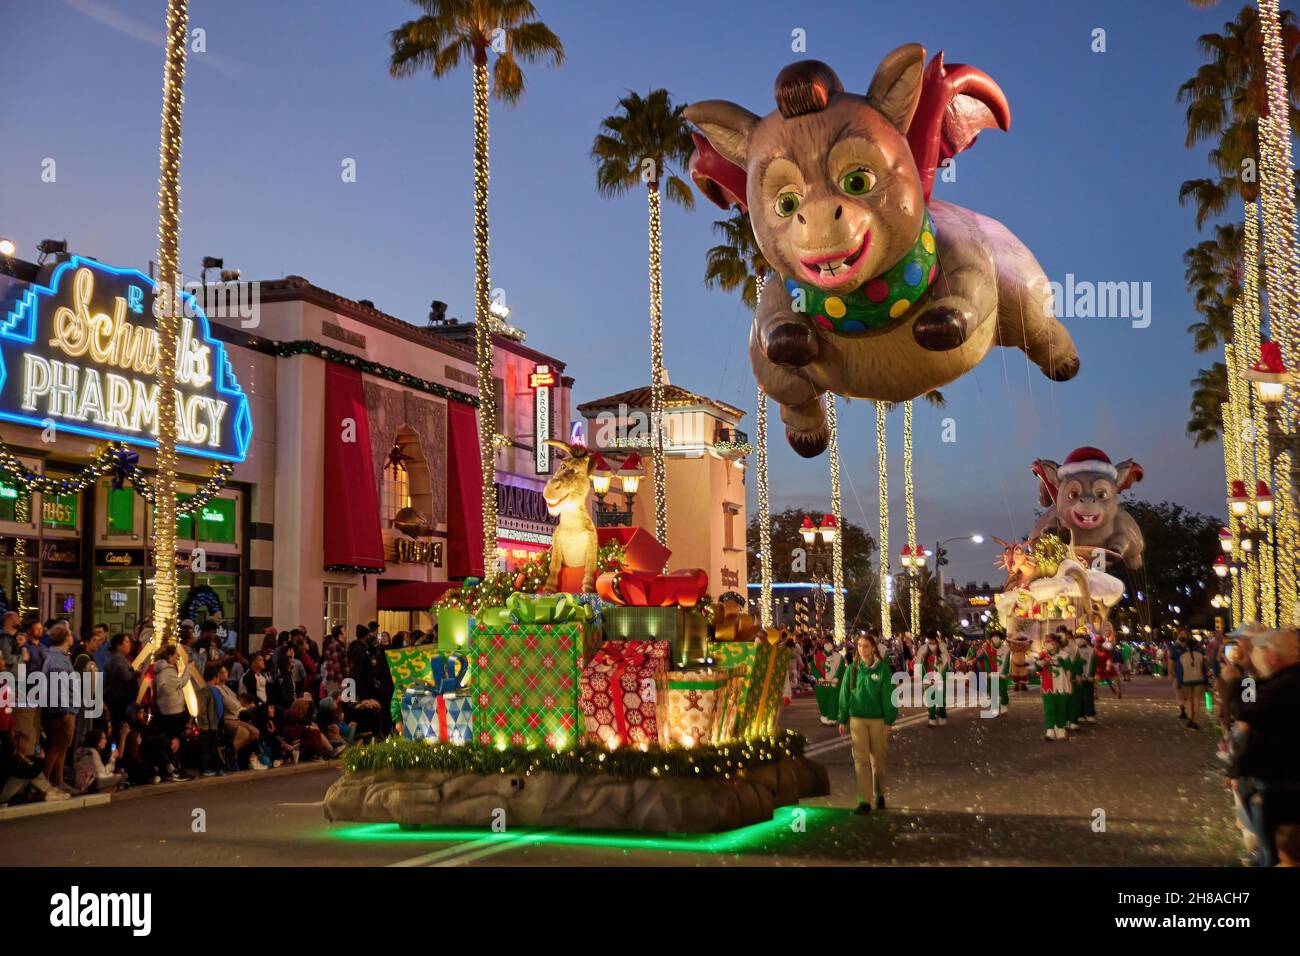 Orlando, USA. 27th Nov, 2021. Since November 13, larger-than-life balloons floating through the streets of Universal Studios Florida, along with appearances by the Minions from Illumination's Despicable Me and some of your favorite characters from DreamWorks Animation's Shrek and Madagascar films. (Photo by Yaroslav Sabitov/YES Market Media/Sipa USA) Credit: Sipa USA/Alamy Live News Stock Photo